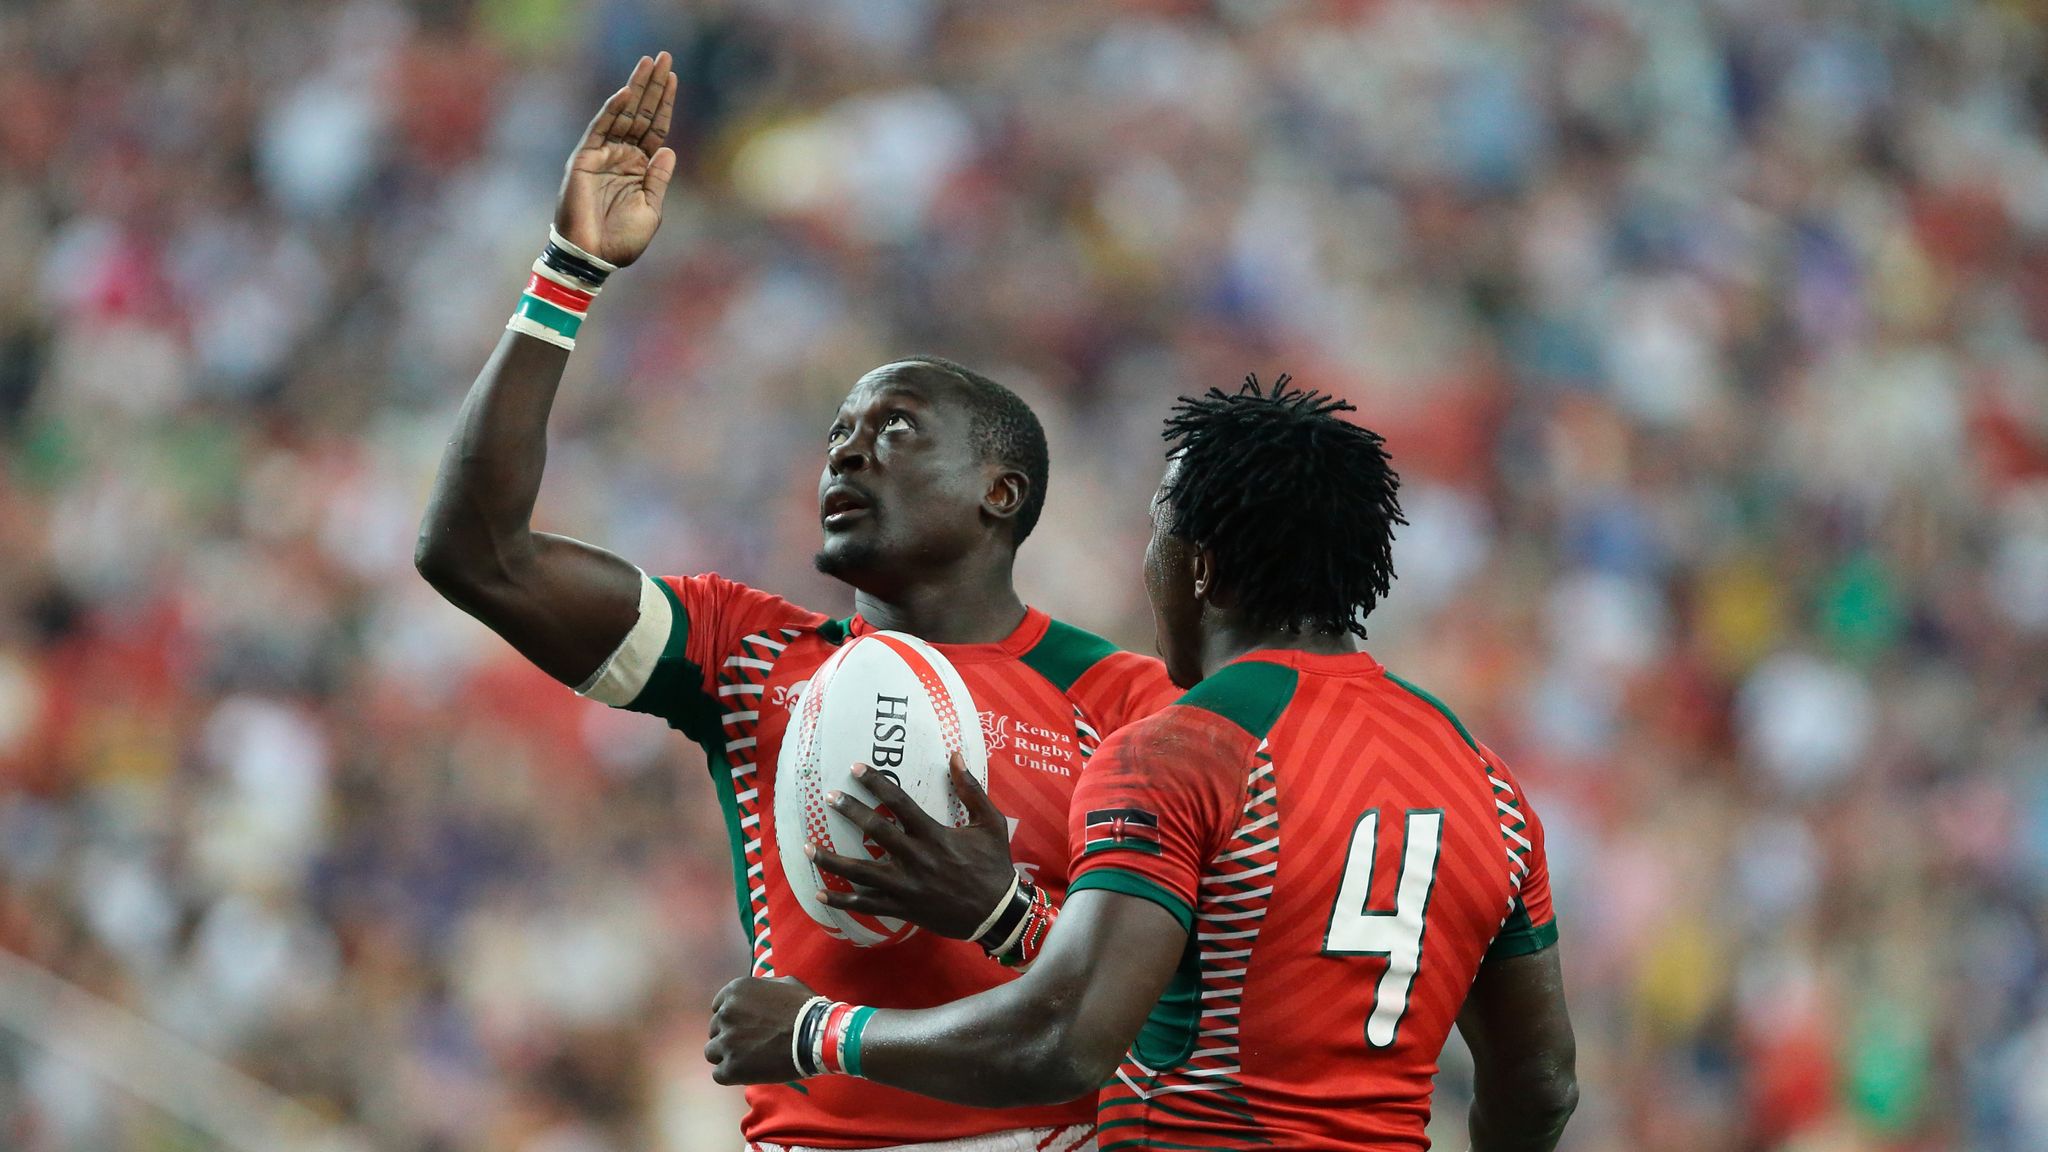 Kenya Rugby Jersey - Home on sale at Rugby City